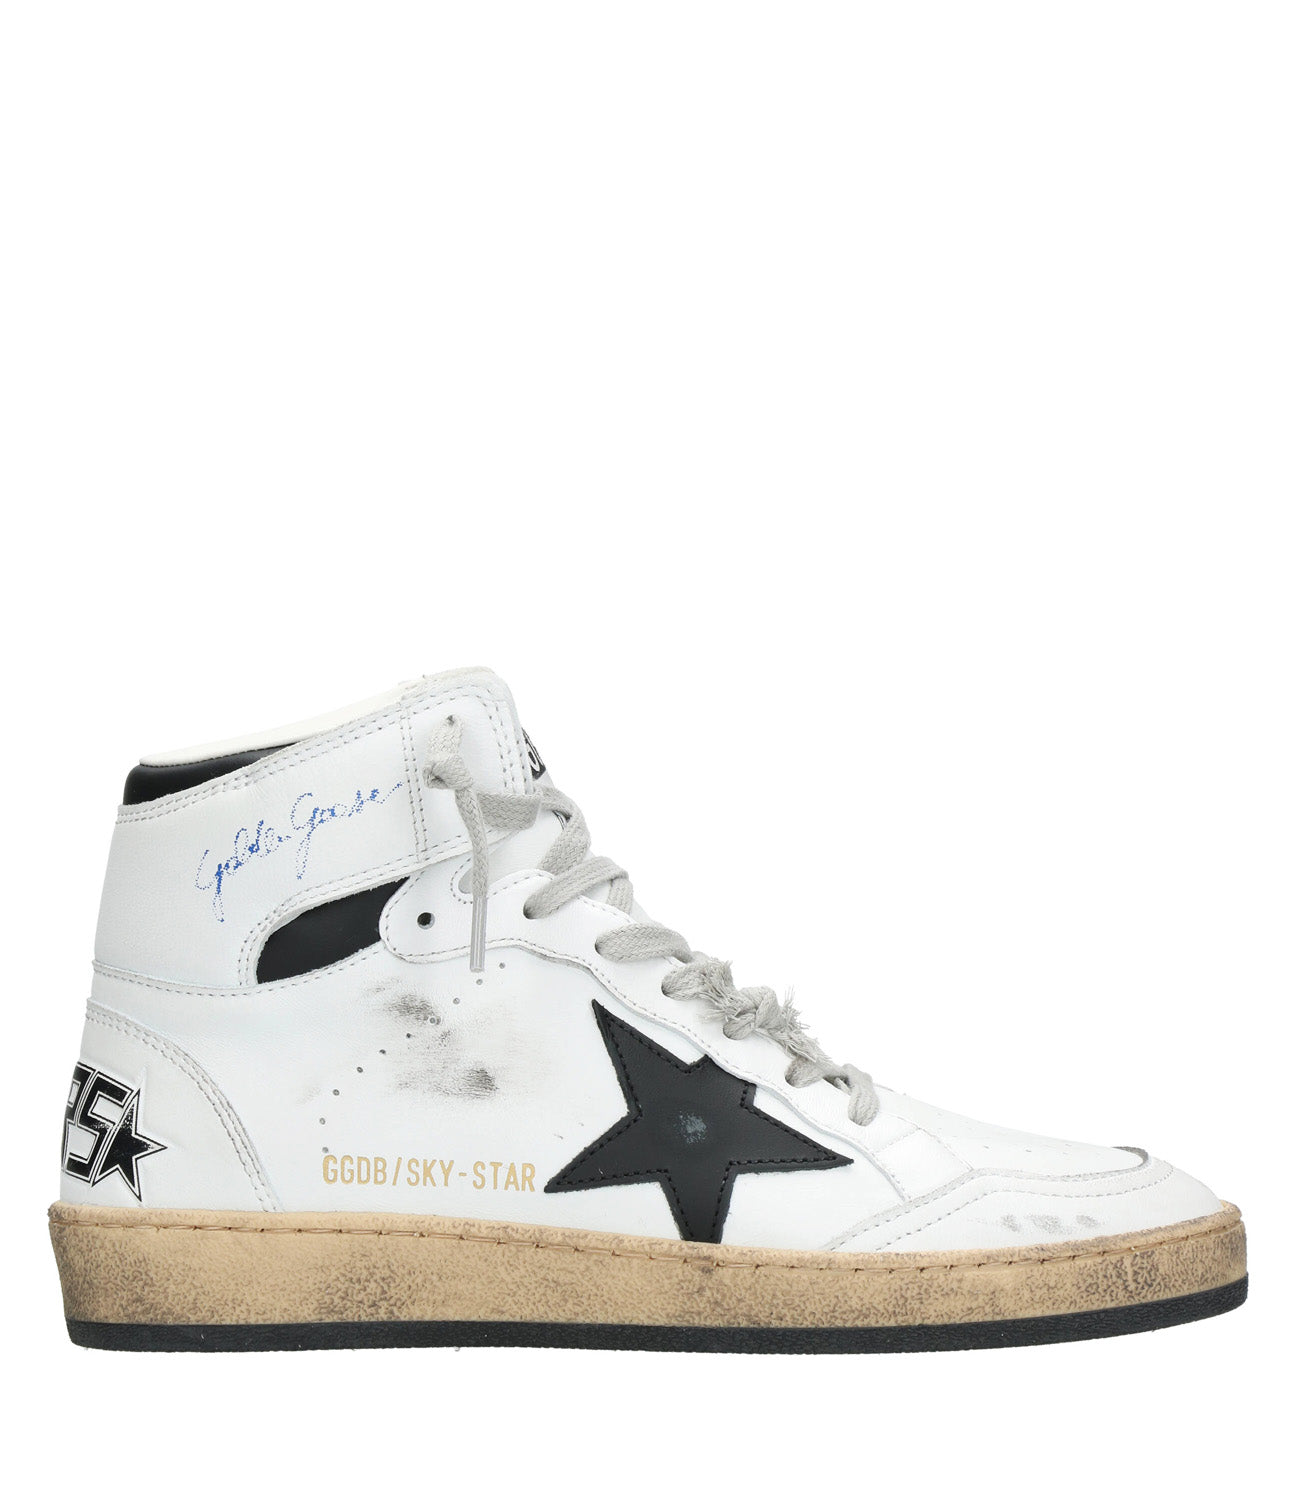 Golden Goose | Sky Star Sneakers White and Black